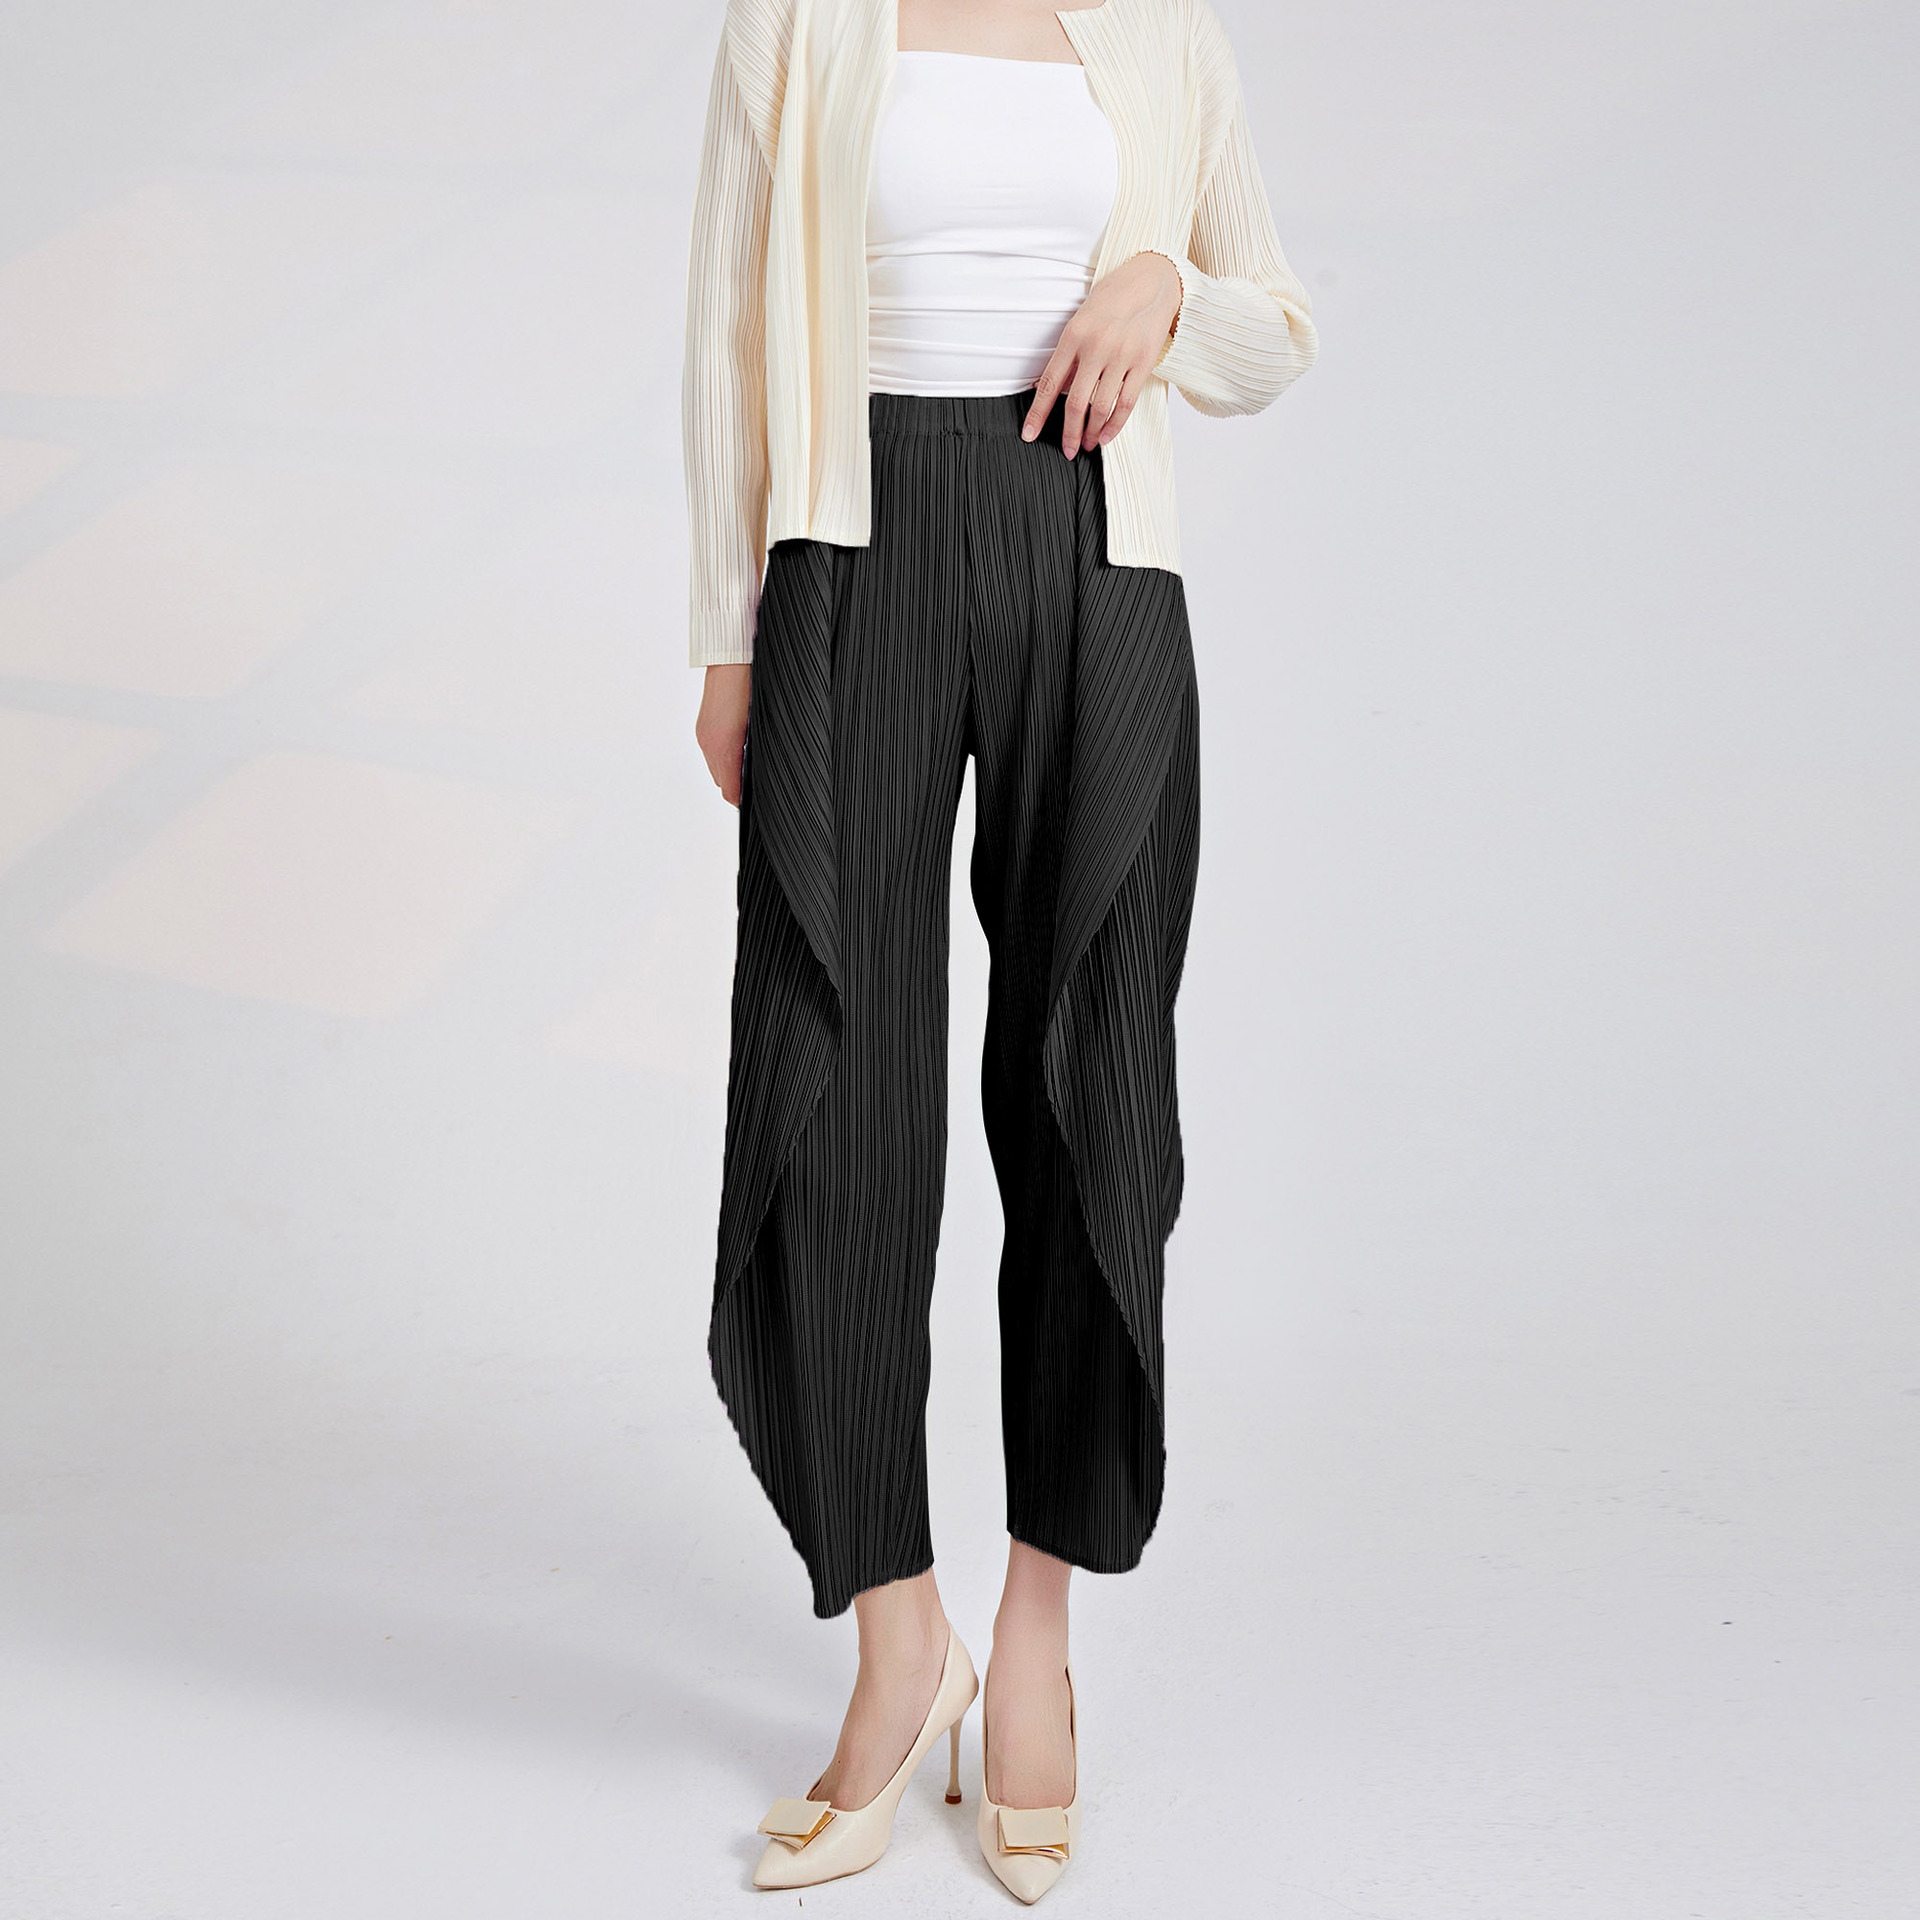 Eye-Catching styles lady's fashion Fashion Pants Effortlessly fashionable pants for any occasion